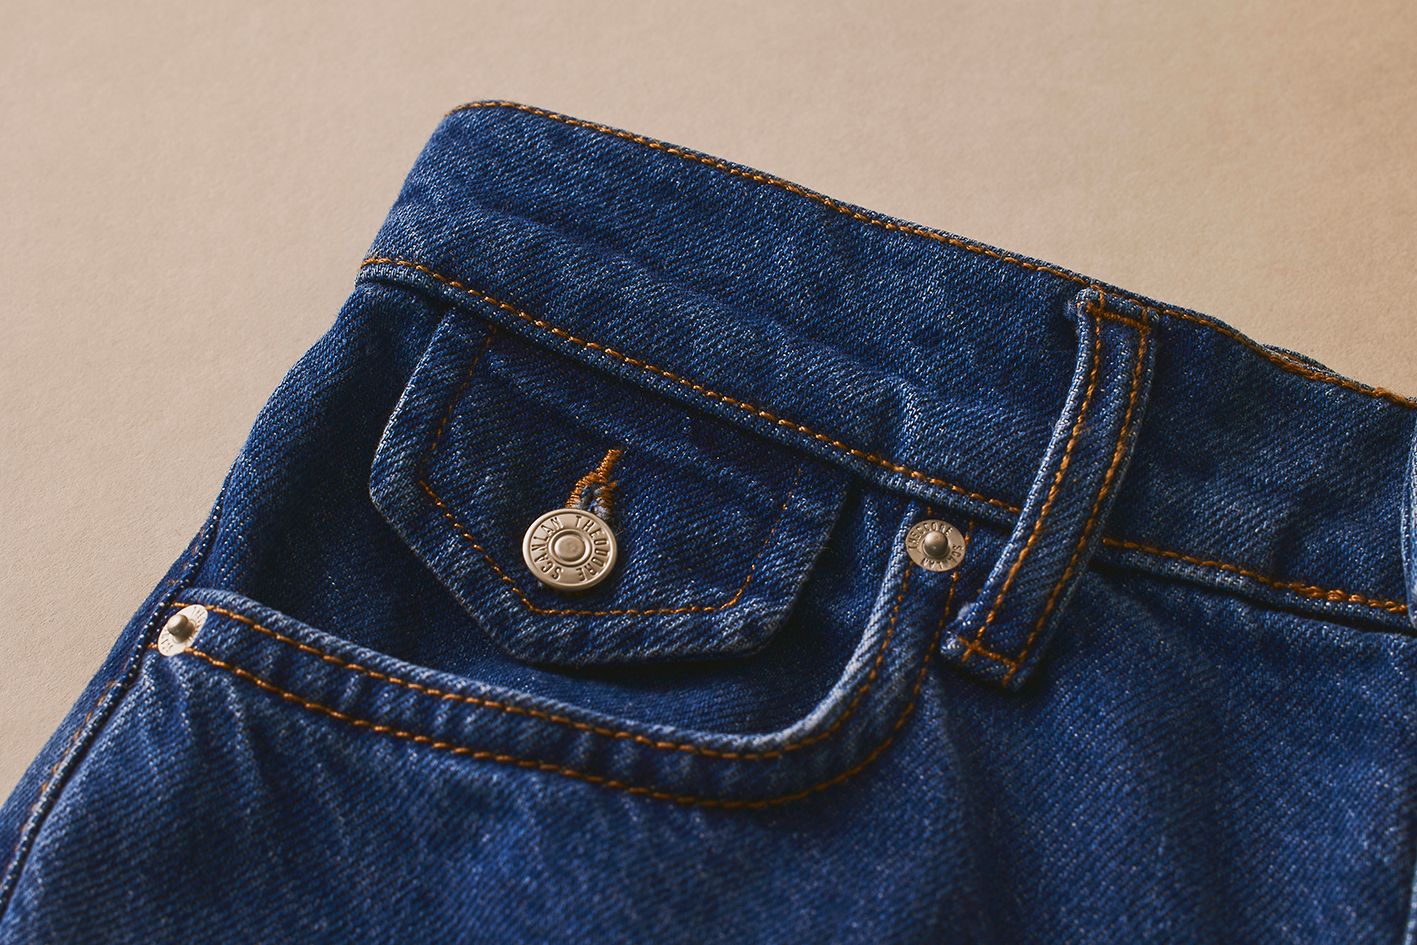 Scanlan Theodore denim jeans in a deep indigo hue and detail of pocket, button and belt loop.